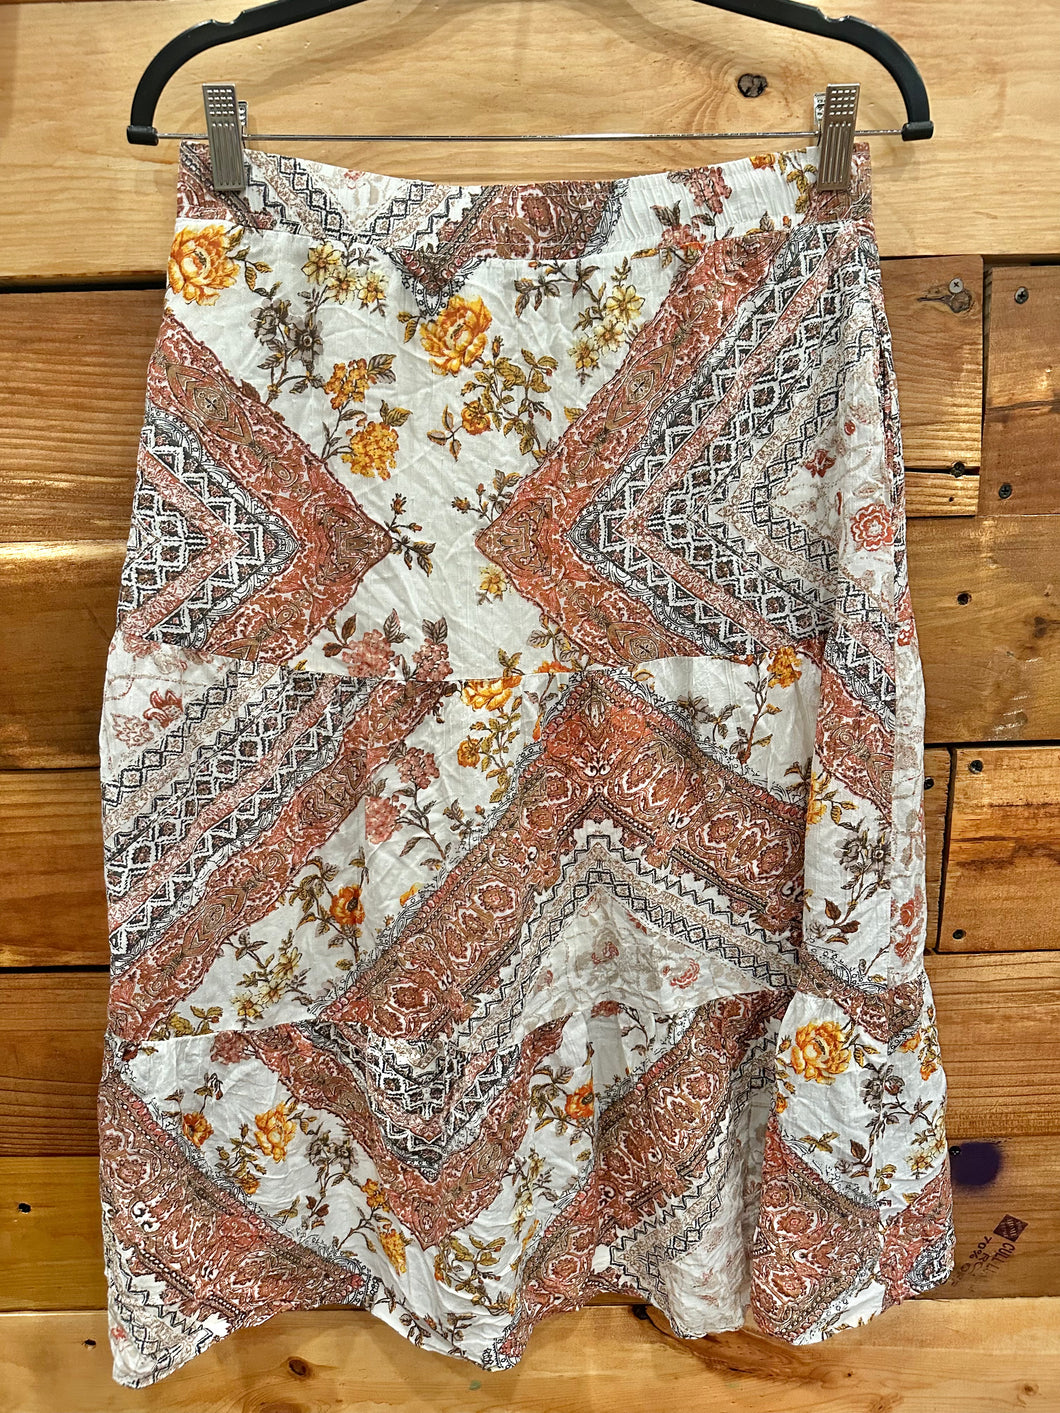 Good Hart Brown Floral Skirt Size Small